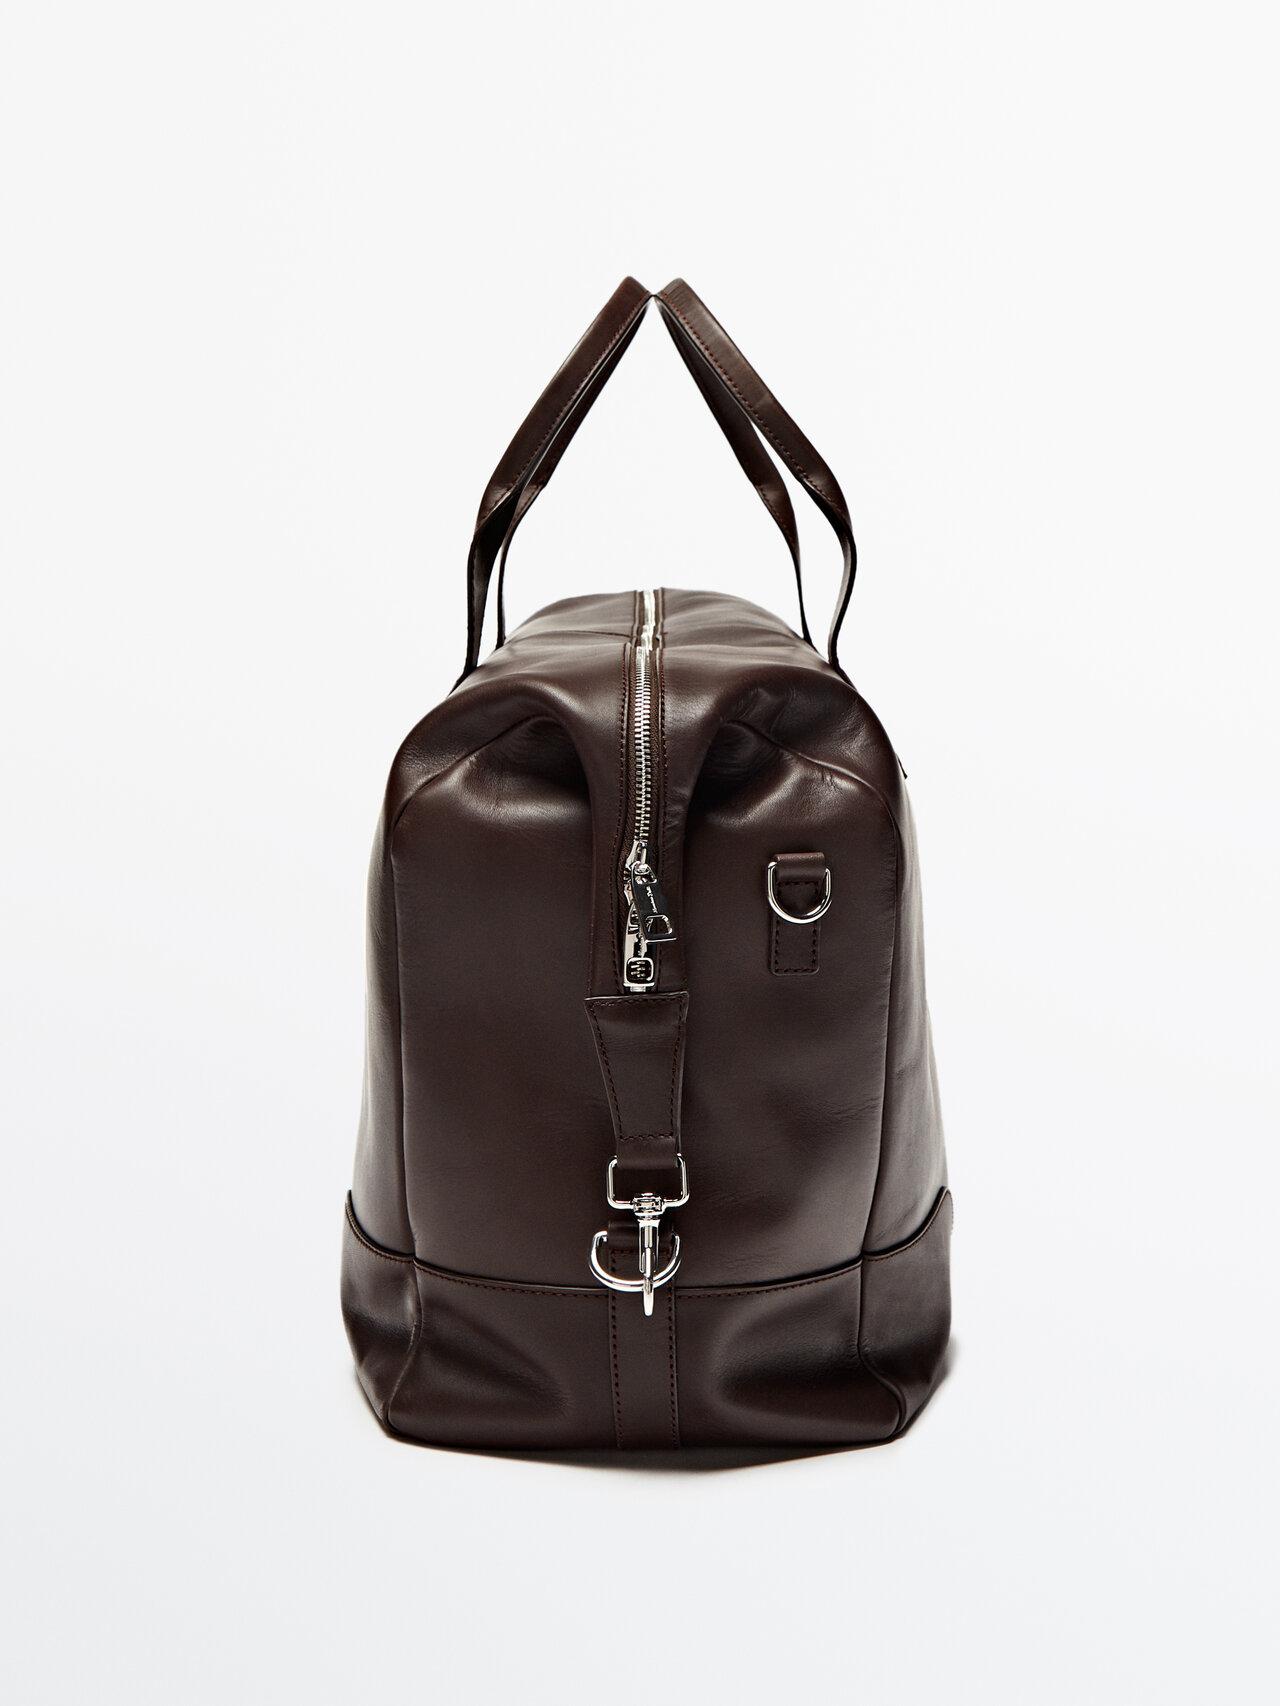 MASSIMO DUTTI Leather Bowling Bag in Brown for Men | Lyst